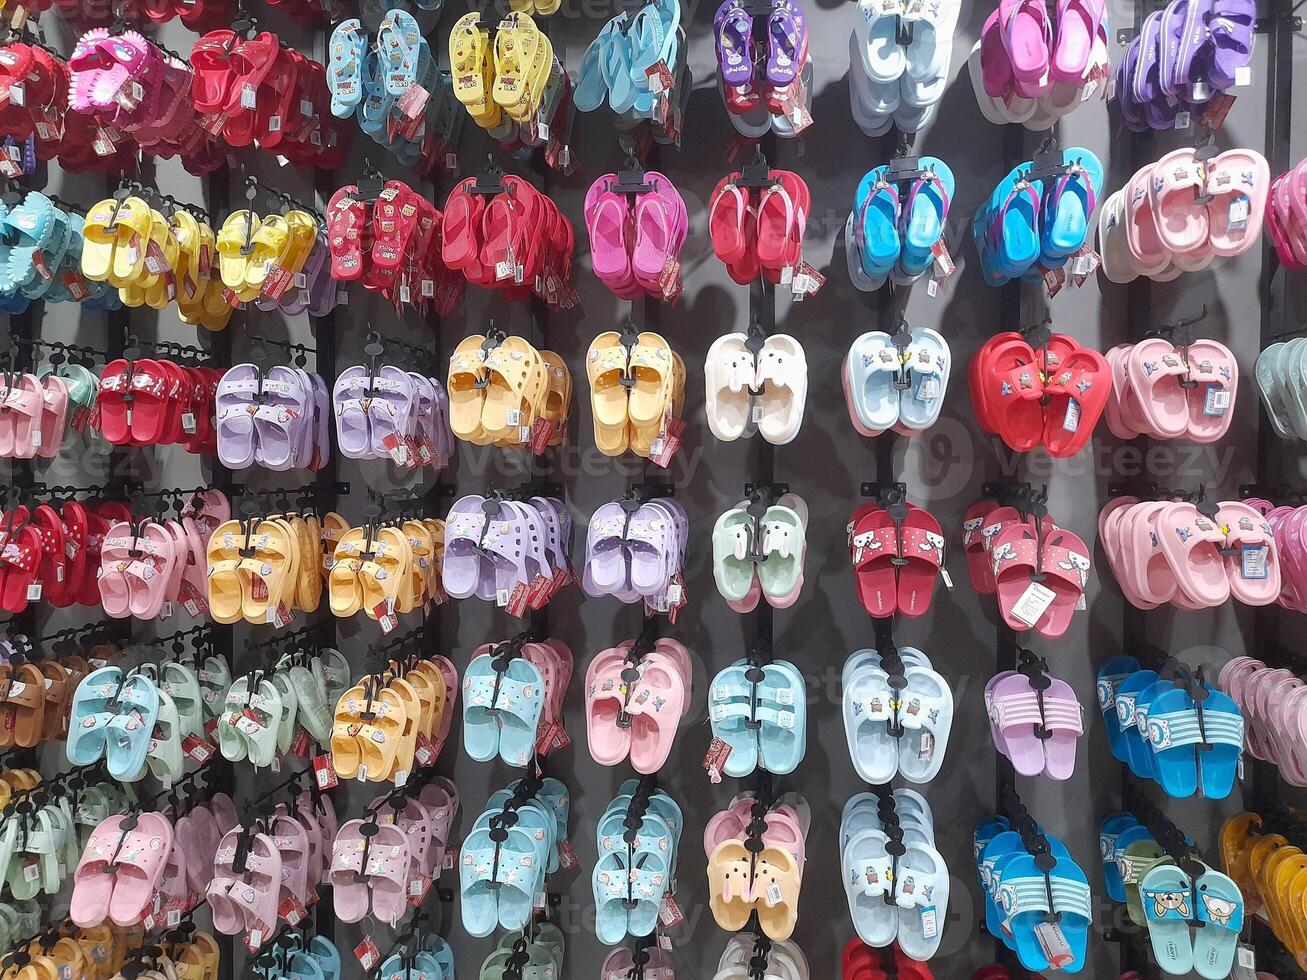 Various types of shoes and sandals displayed in a shoe shop storefront. photo